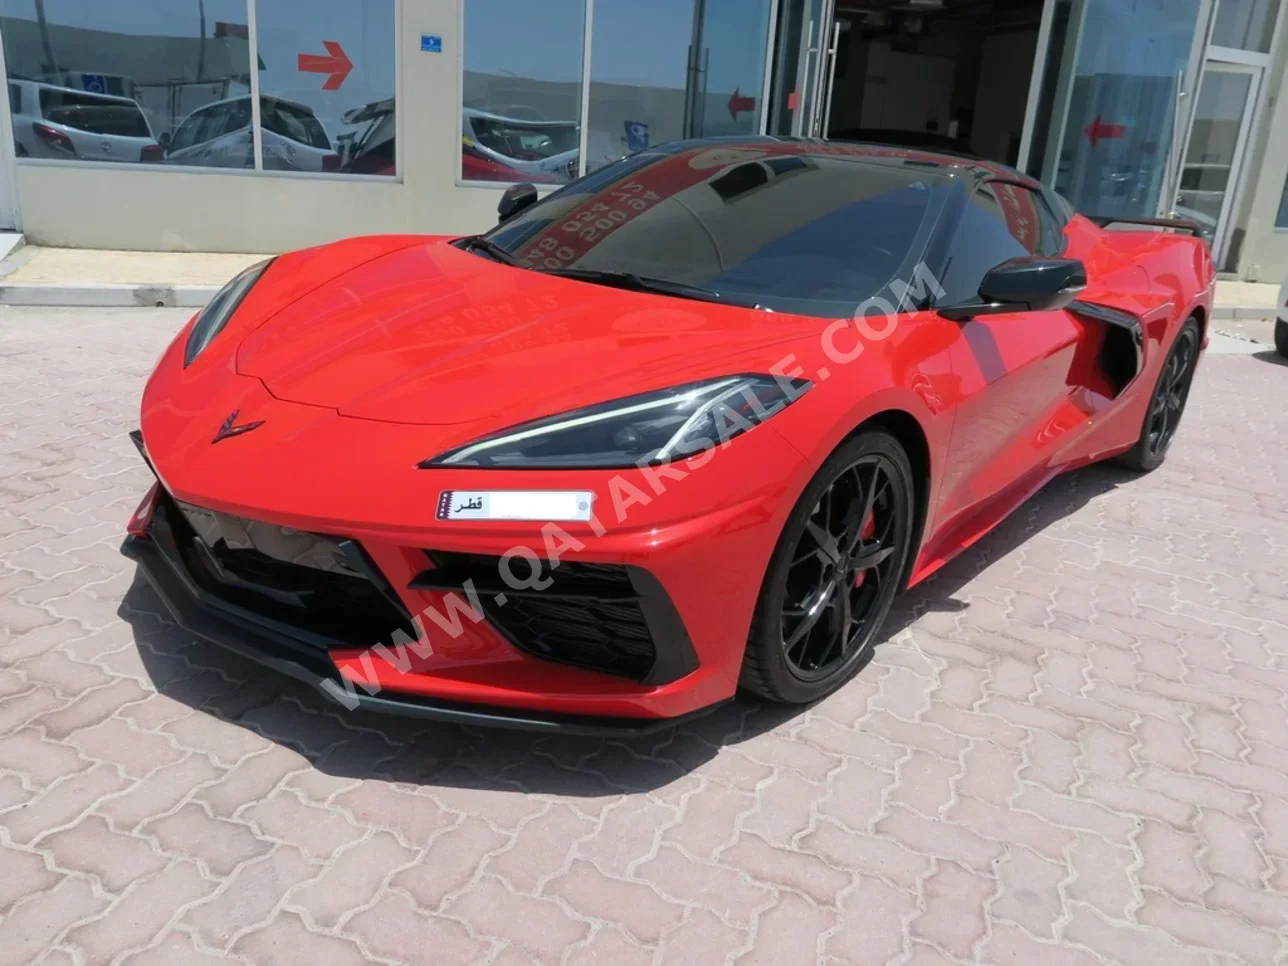 Chevrolet  Corvette  C8  2021  Automatic  38,000 Km  8 Cylinder  Rear Wheel Drive (RWD)  Coupe / Sport  Red  With Warranty